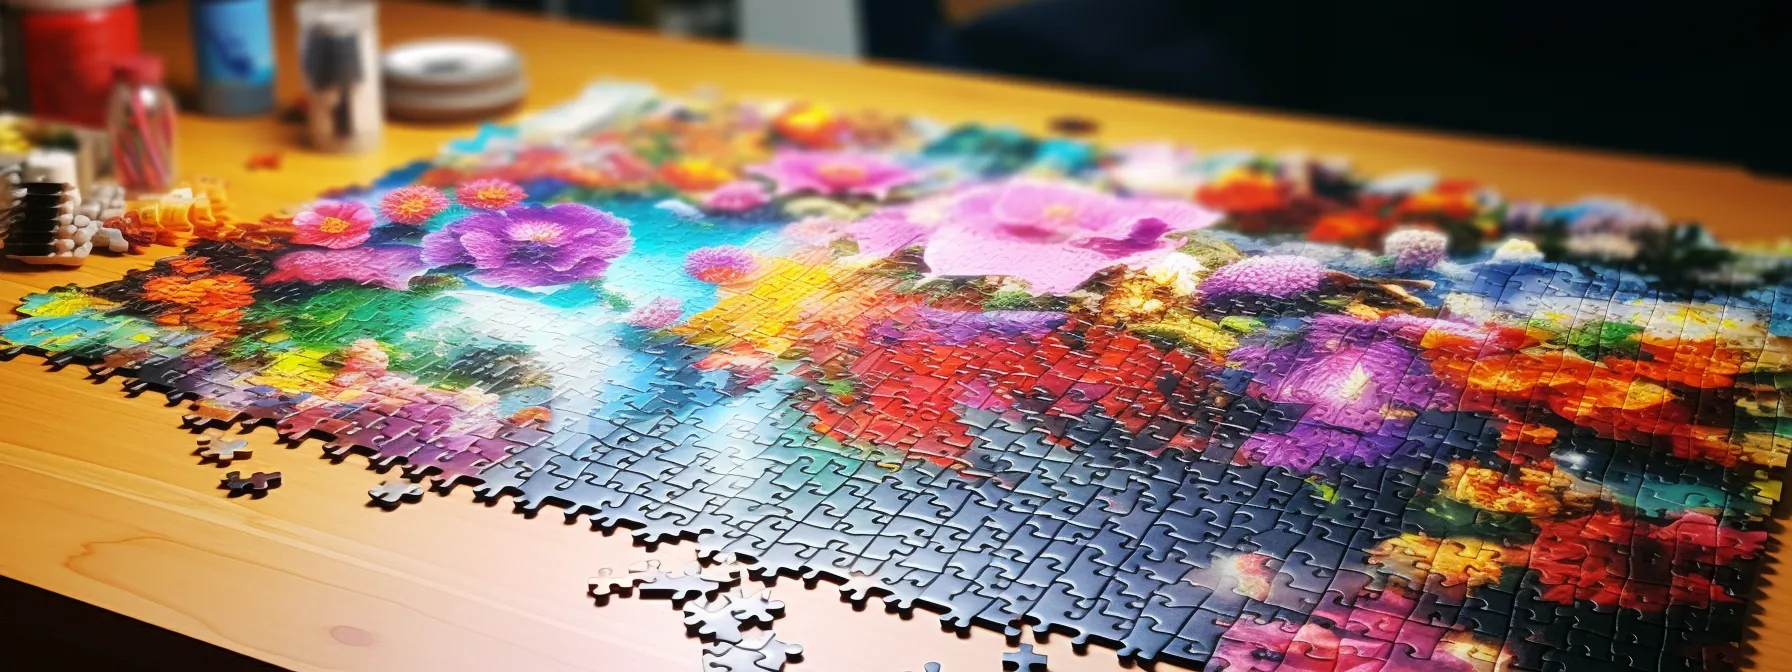 A Completed Puzzle With All The Pieces Fitting Perfectly Together To Form A Masterpiece.